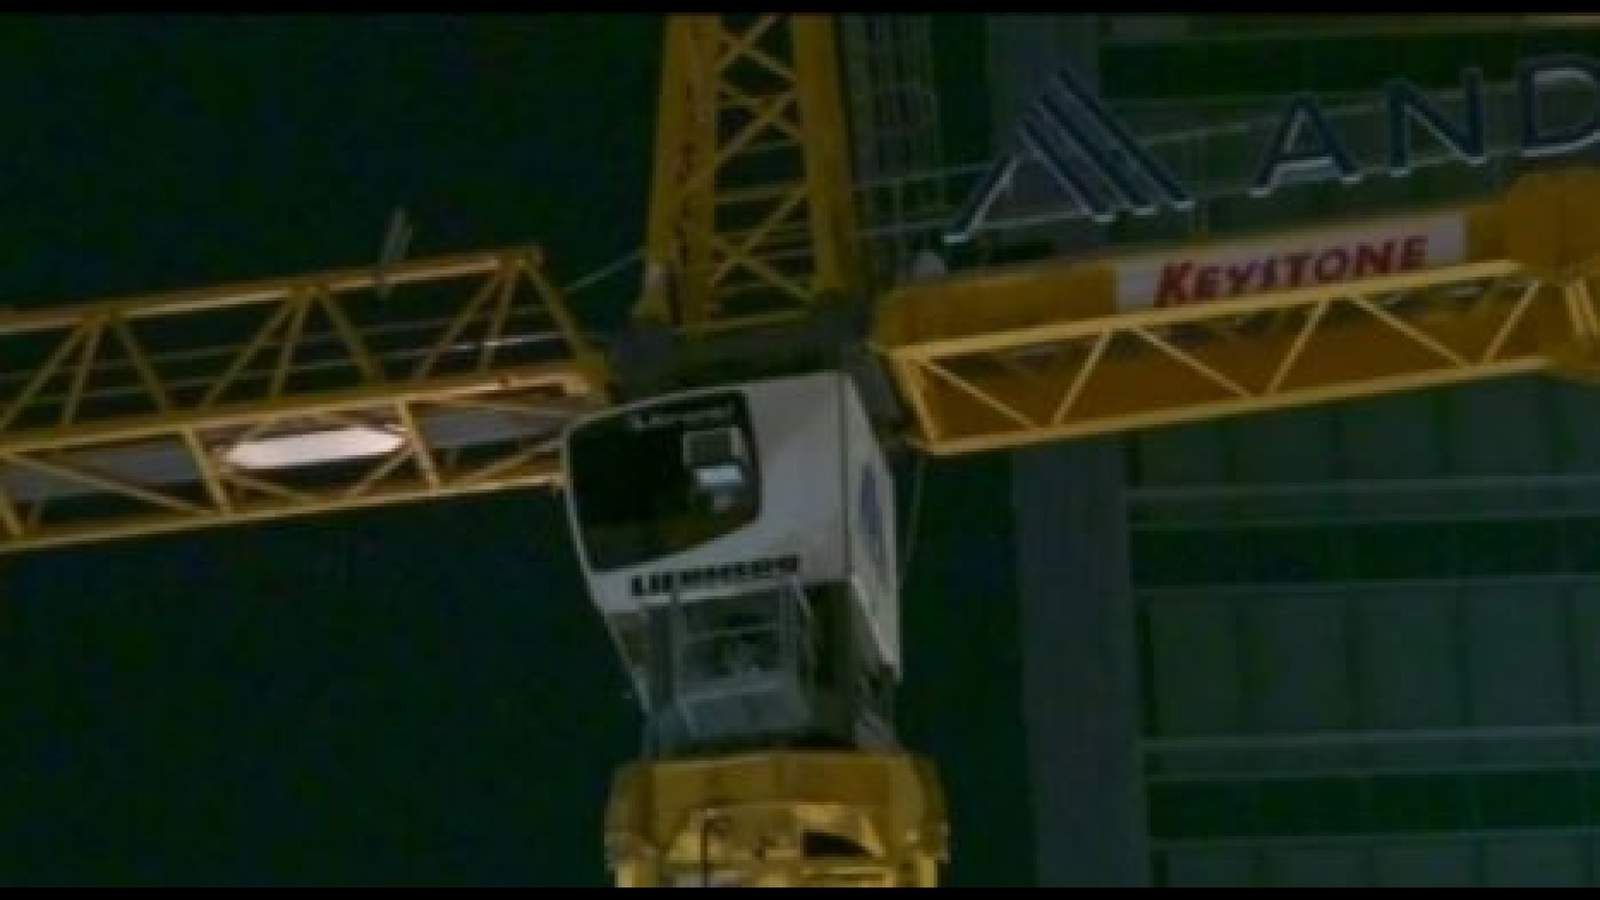 Man climbs at least 15 stories to break into construction crane, removed by SWAT in Houston